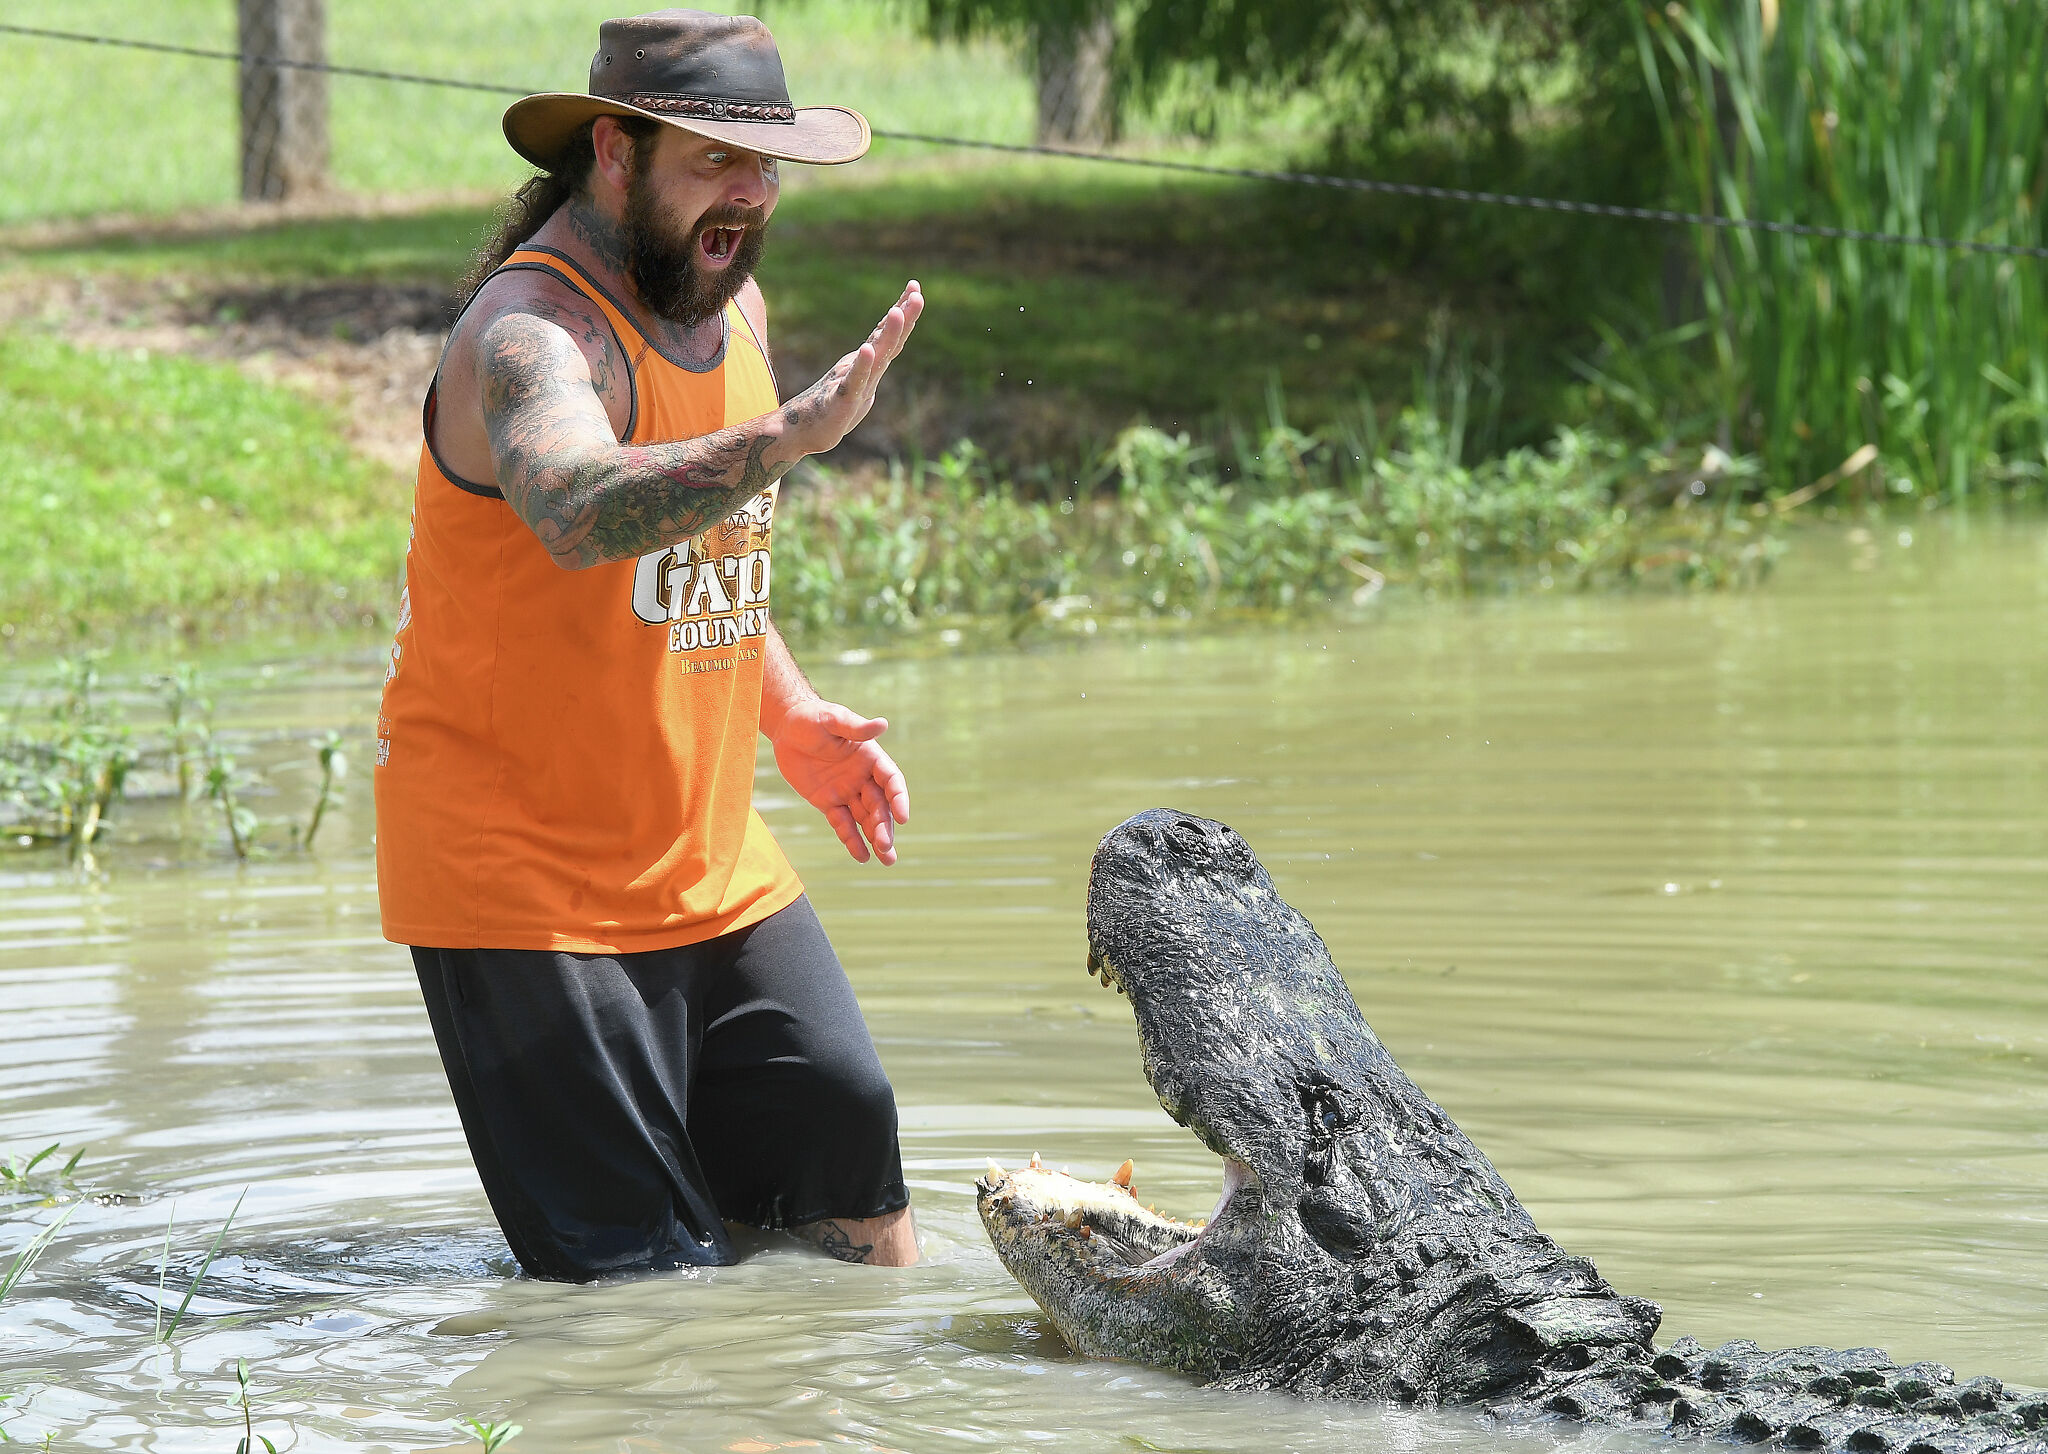  7 Questions With ... Gator Country's co-owner 